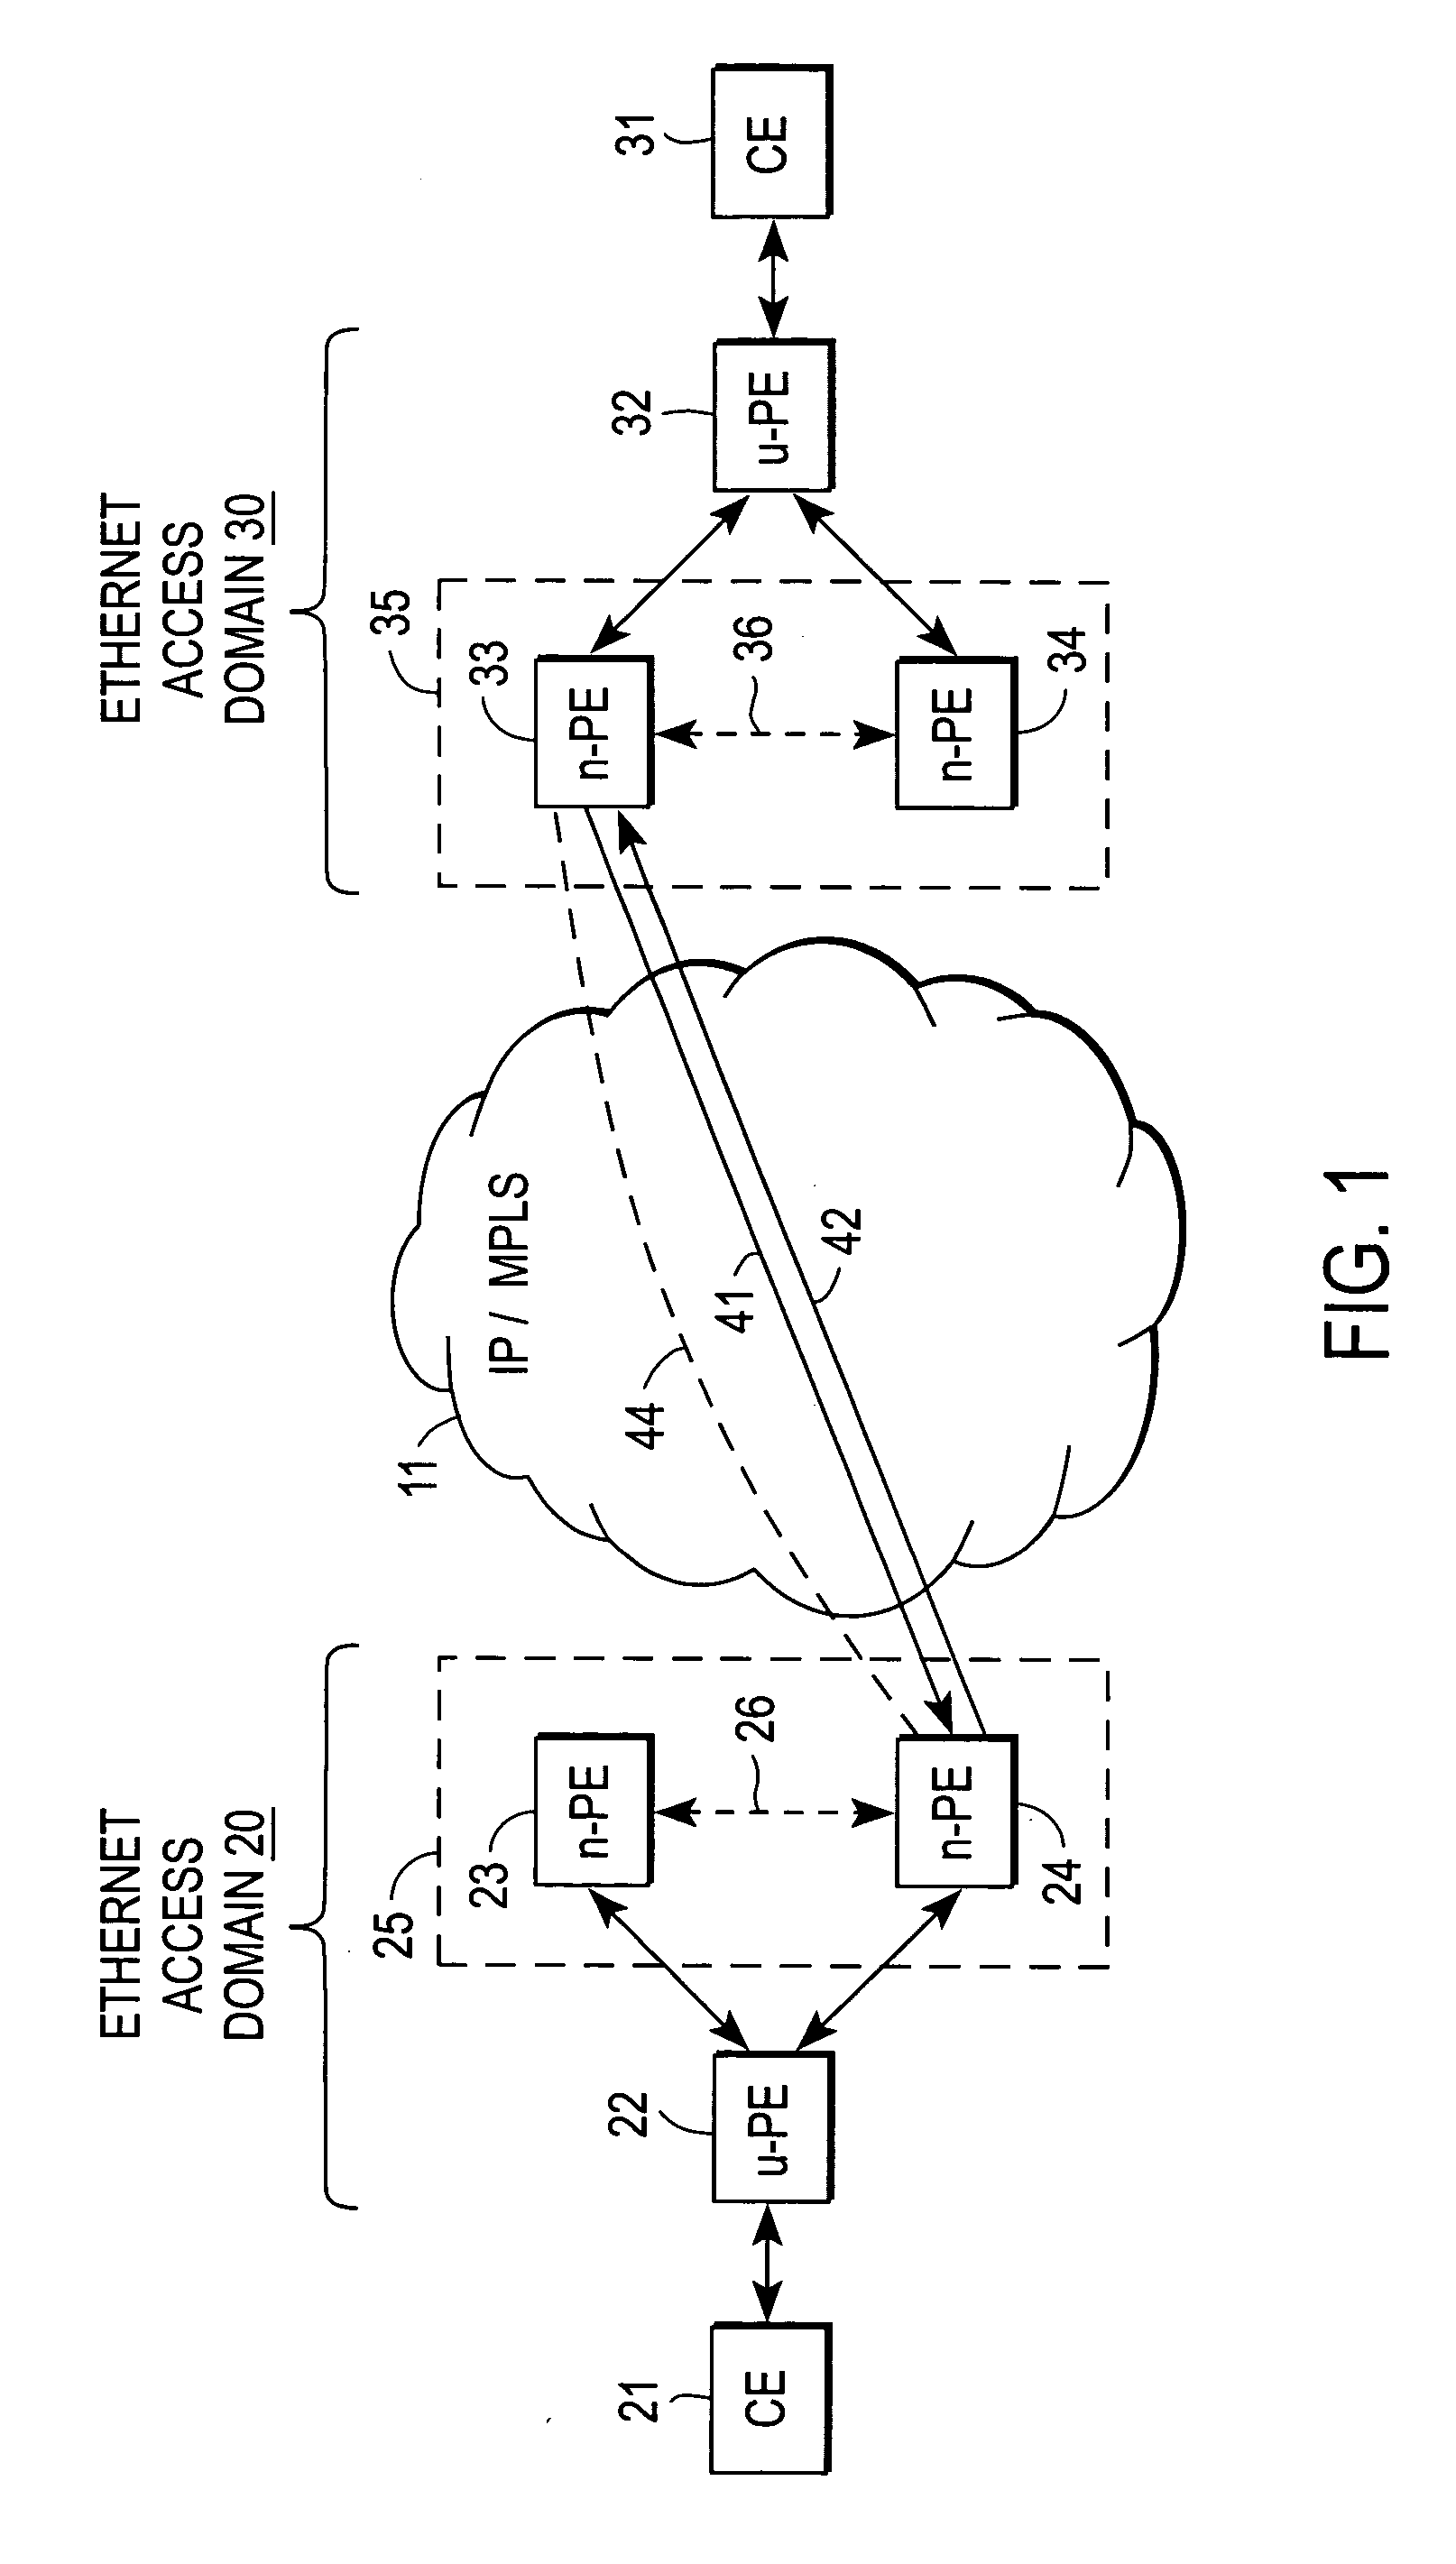 Redundant pseudowires between Ethernet access domains